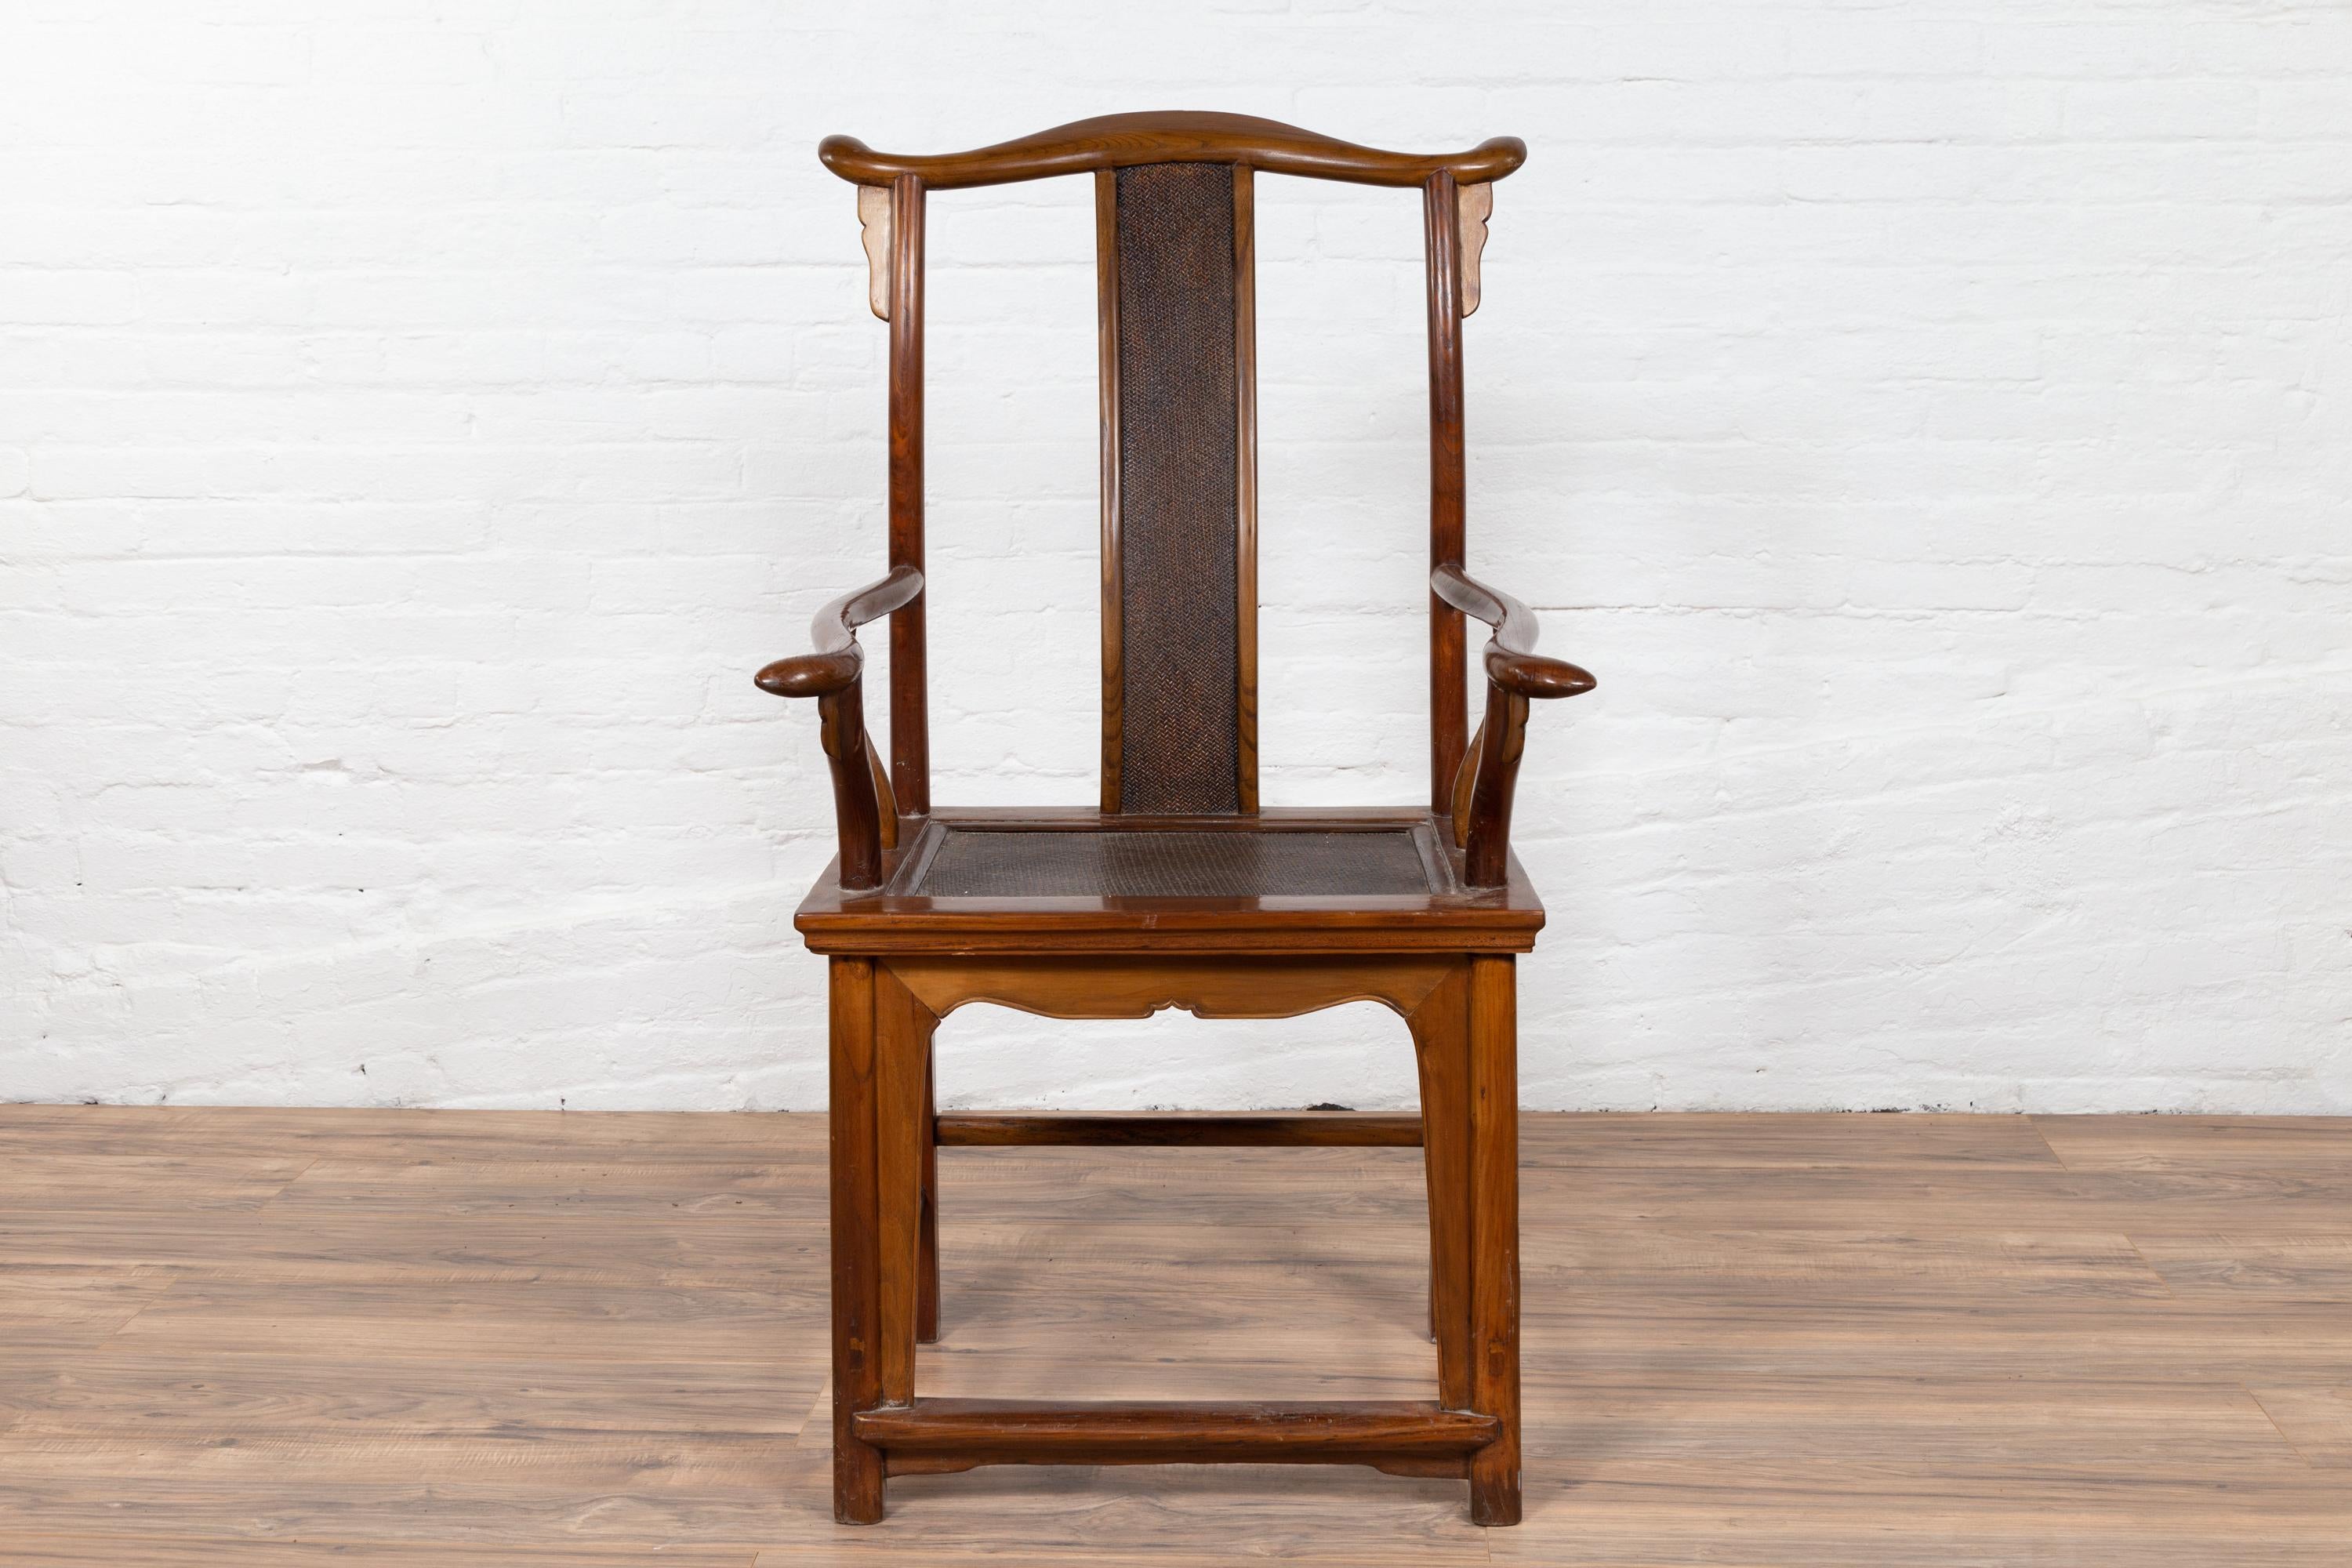 A Chinese Ming Dynasty style antique scholar's chair from the early 20th century, with inset rattan back splat and seat. Born in China during the early years of the 20th century, this exquisite wooden armchair features an elegant tall back, topped